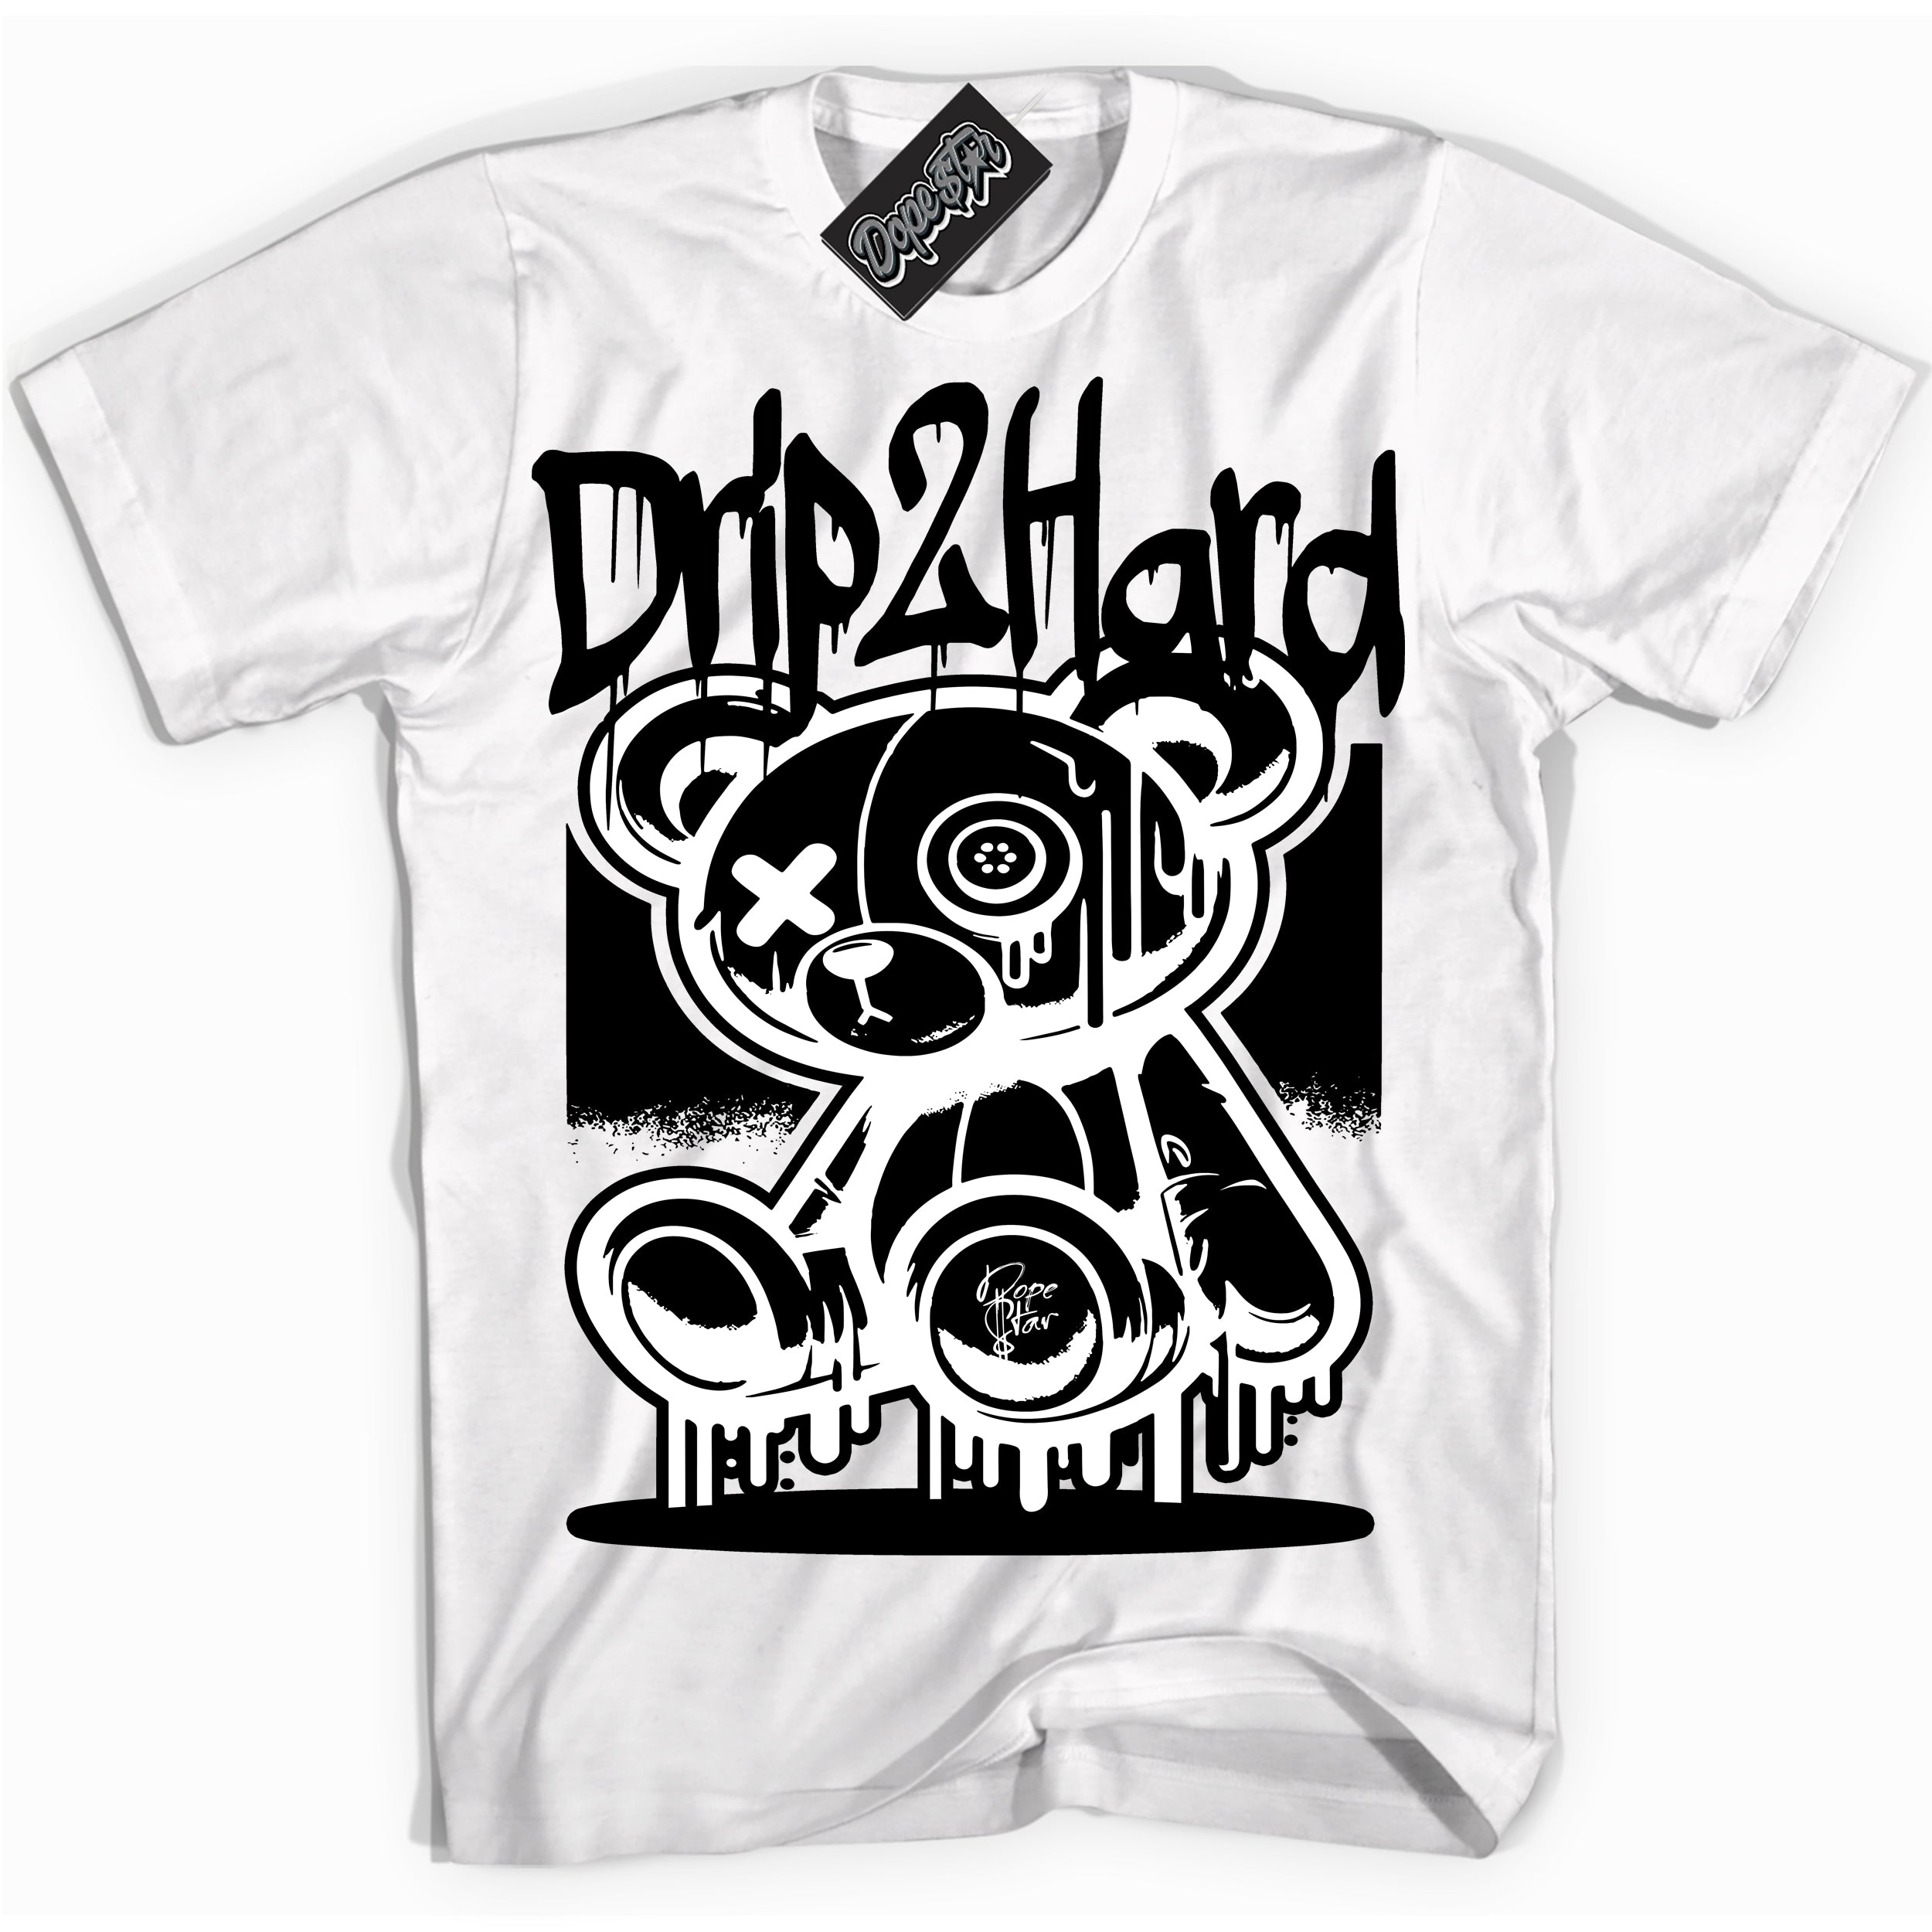 Cool White graphic tee with “ Drip 2 Hard ” design, that perfectly matches Diamond 1s